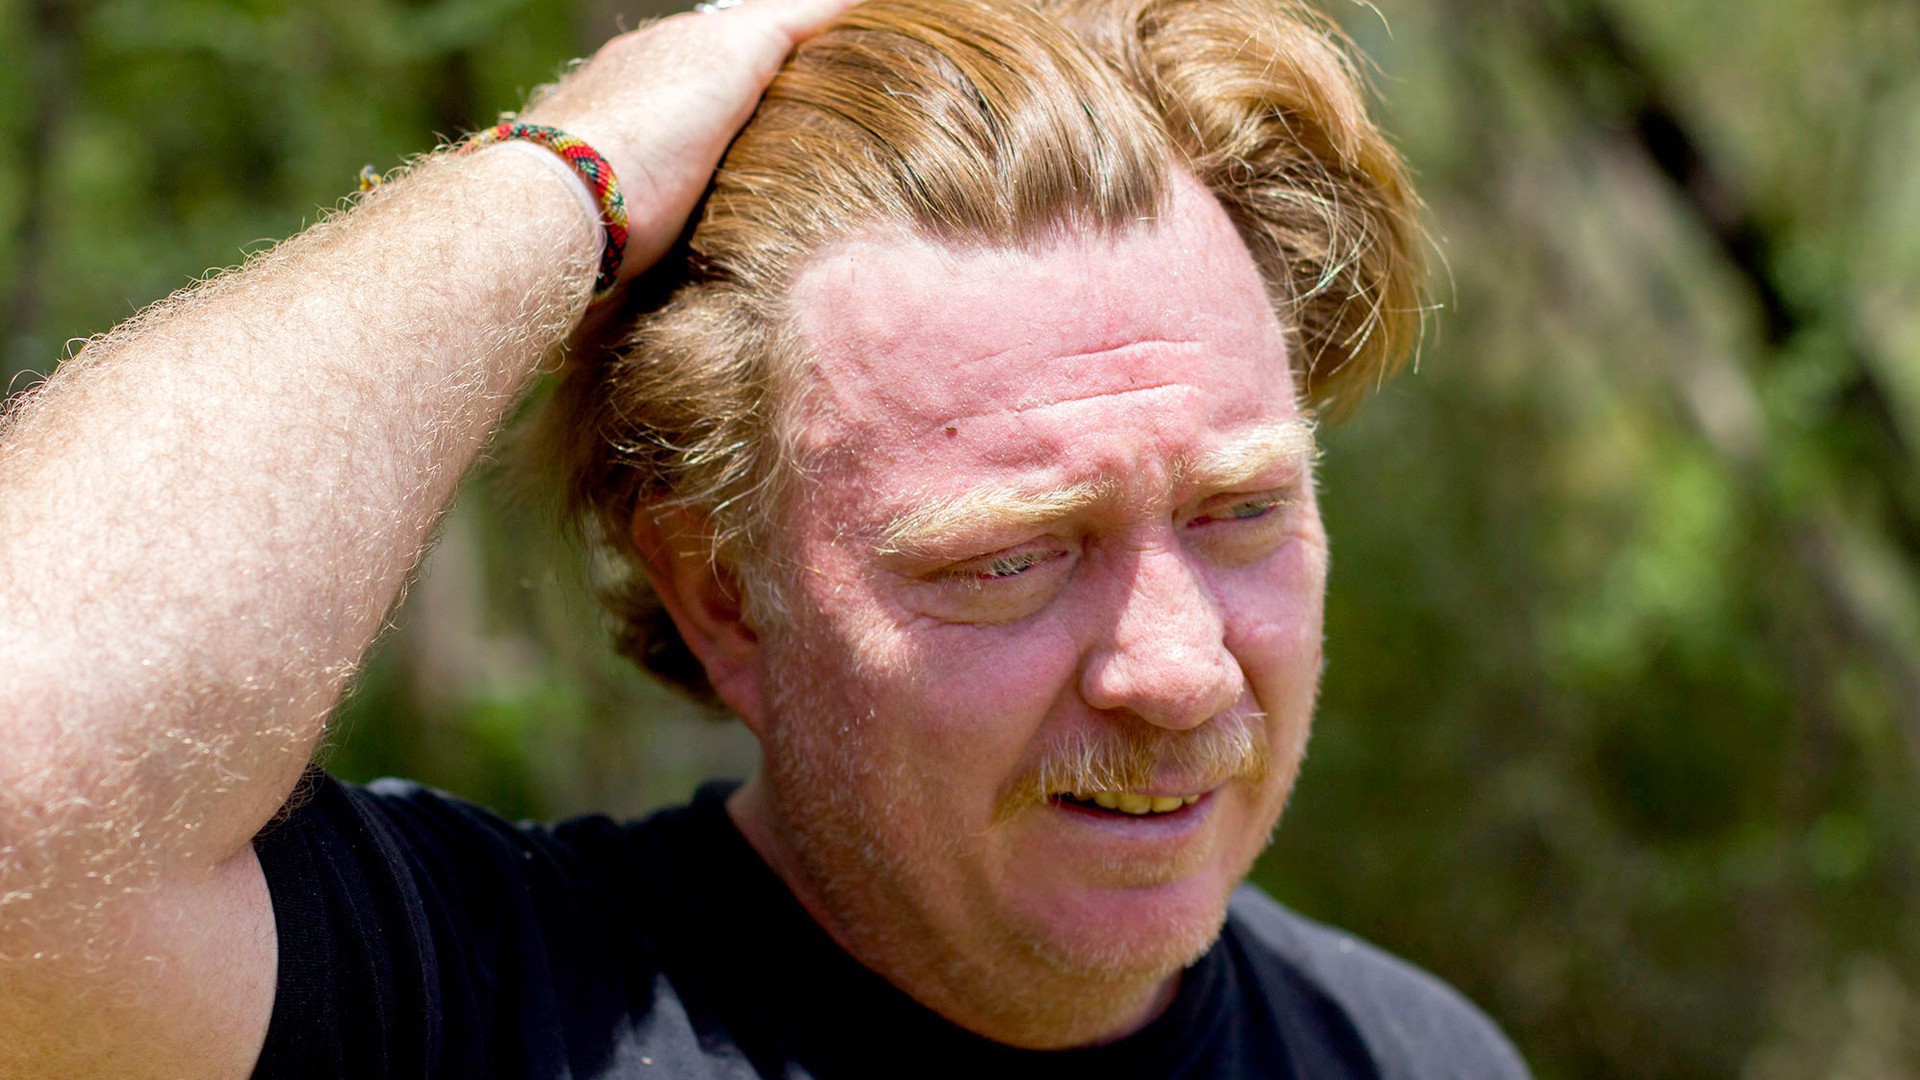 Virgil Edwards pushes his hair back after spending a few hours pruning trees. His eyes are red from sawdust that fell in them. (Photo by Connor Radnovich.)